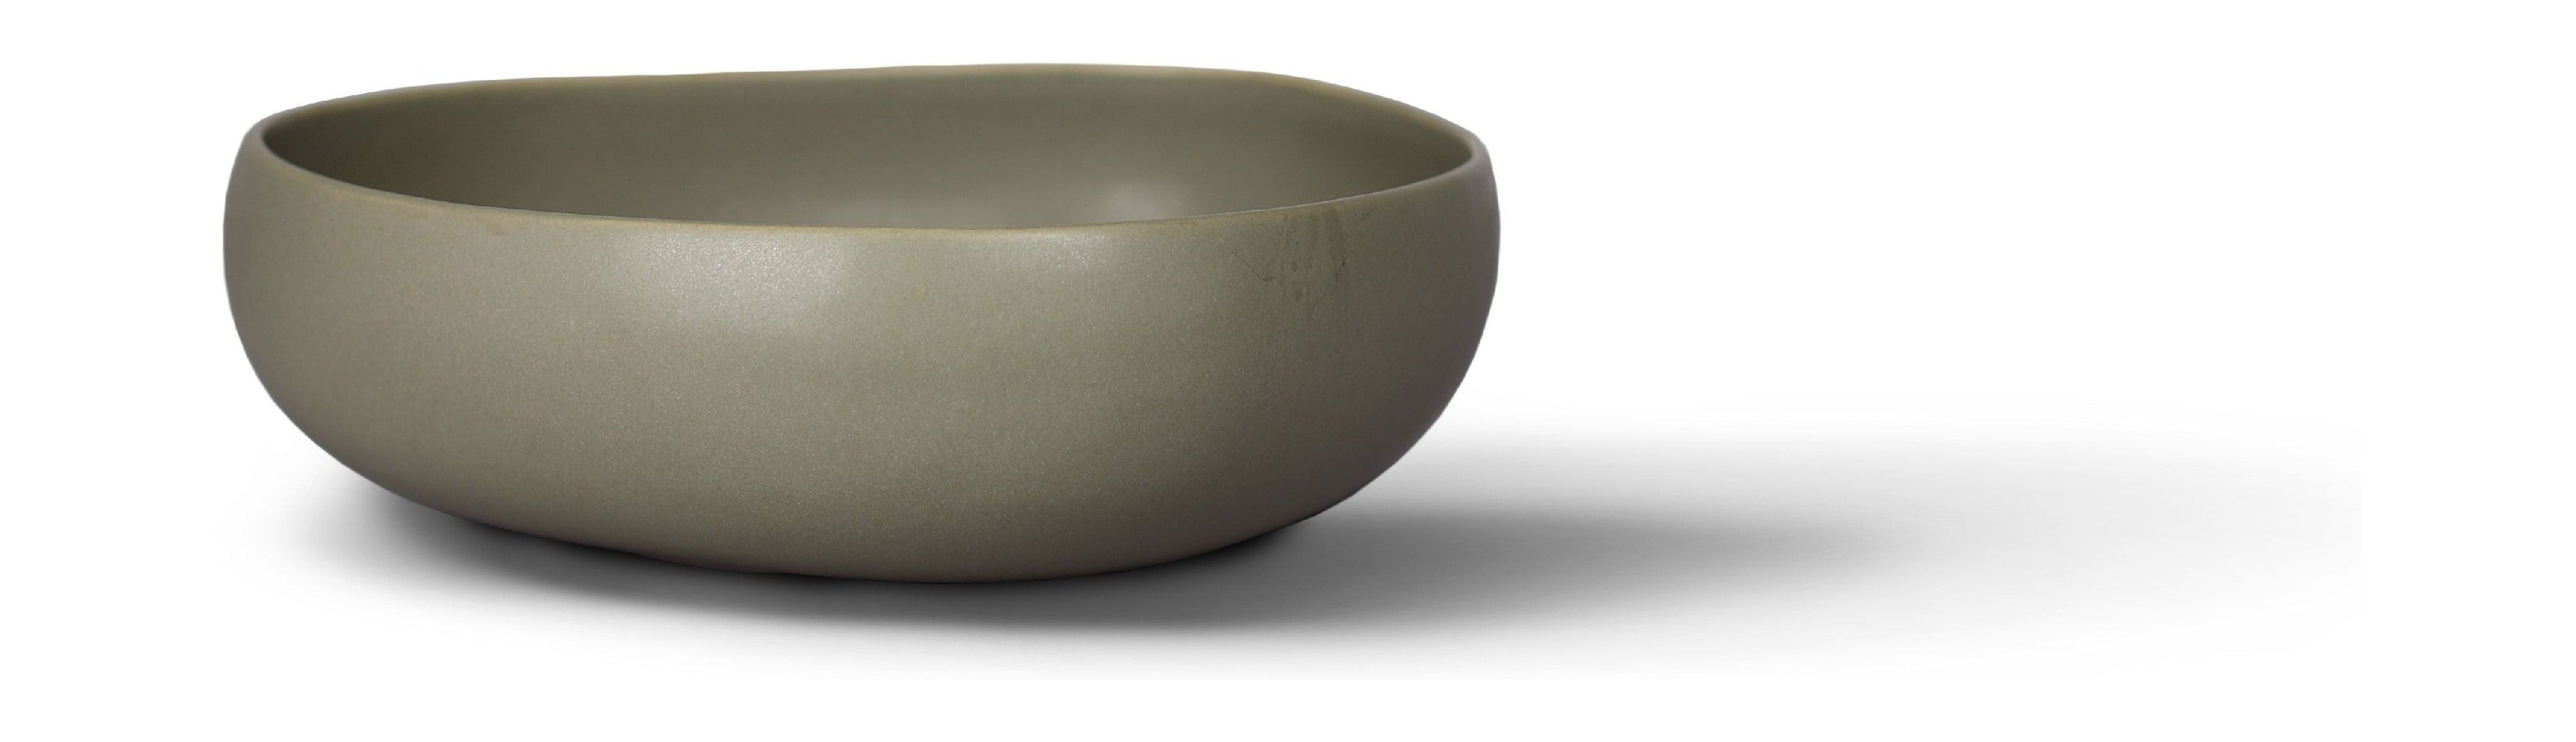 Ro Collection Signature Bowl X Large, Pale Green